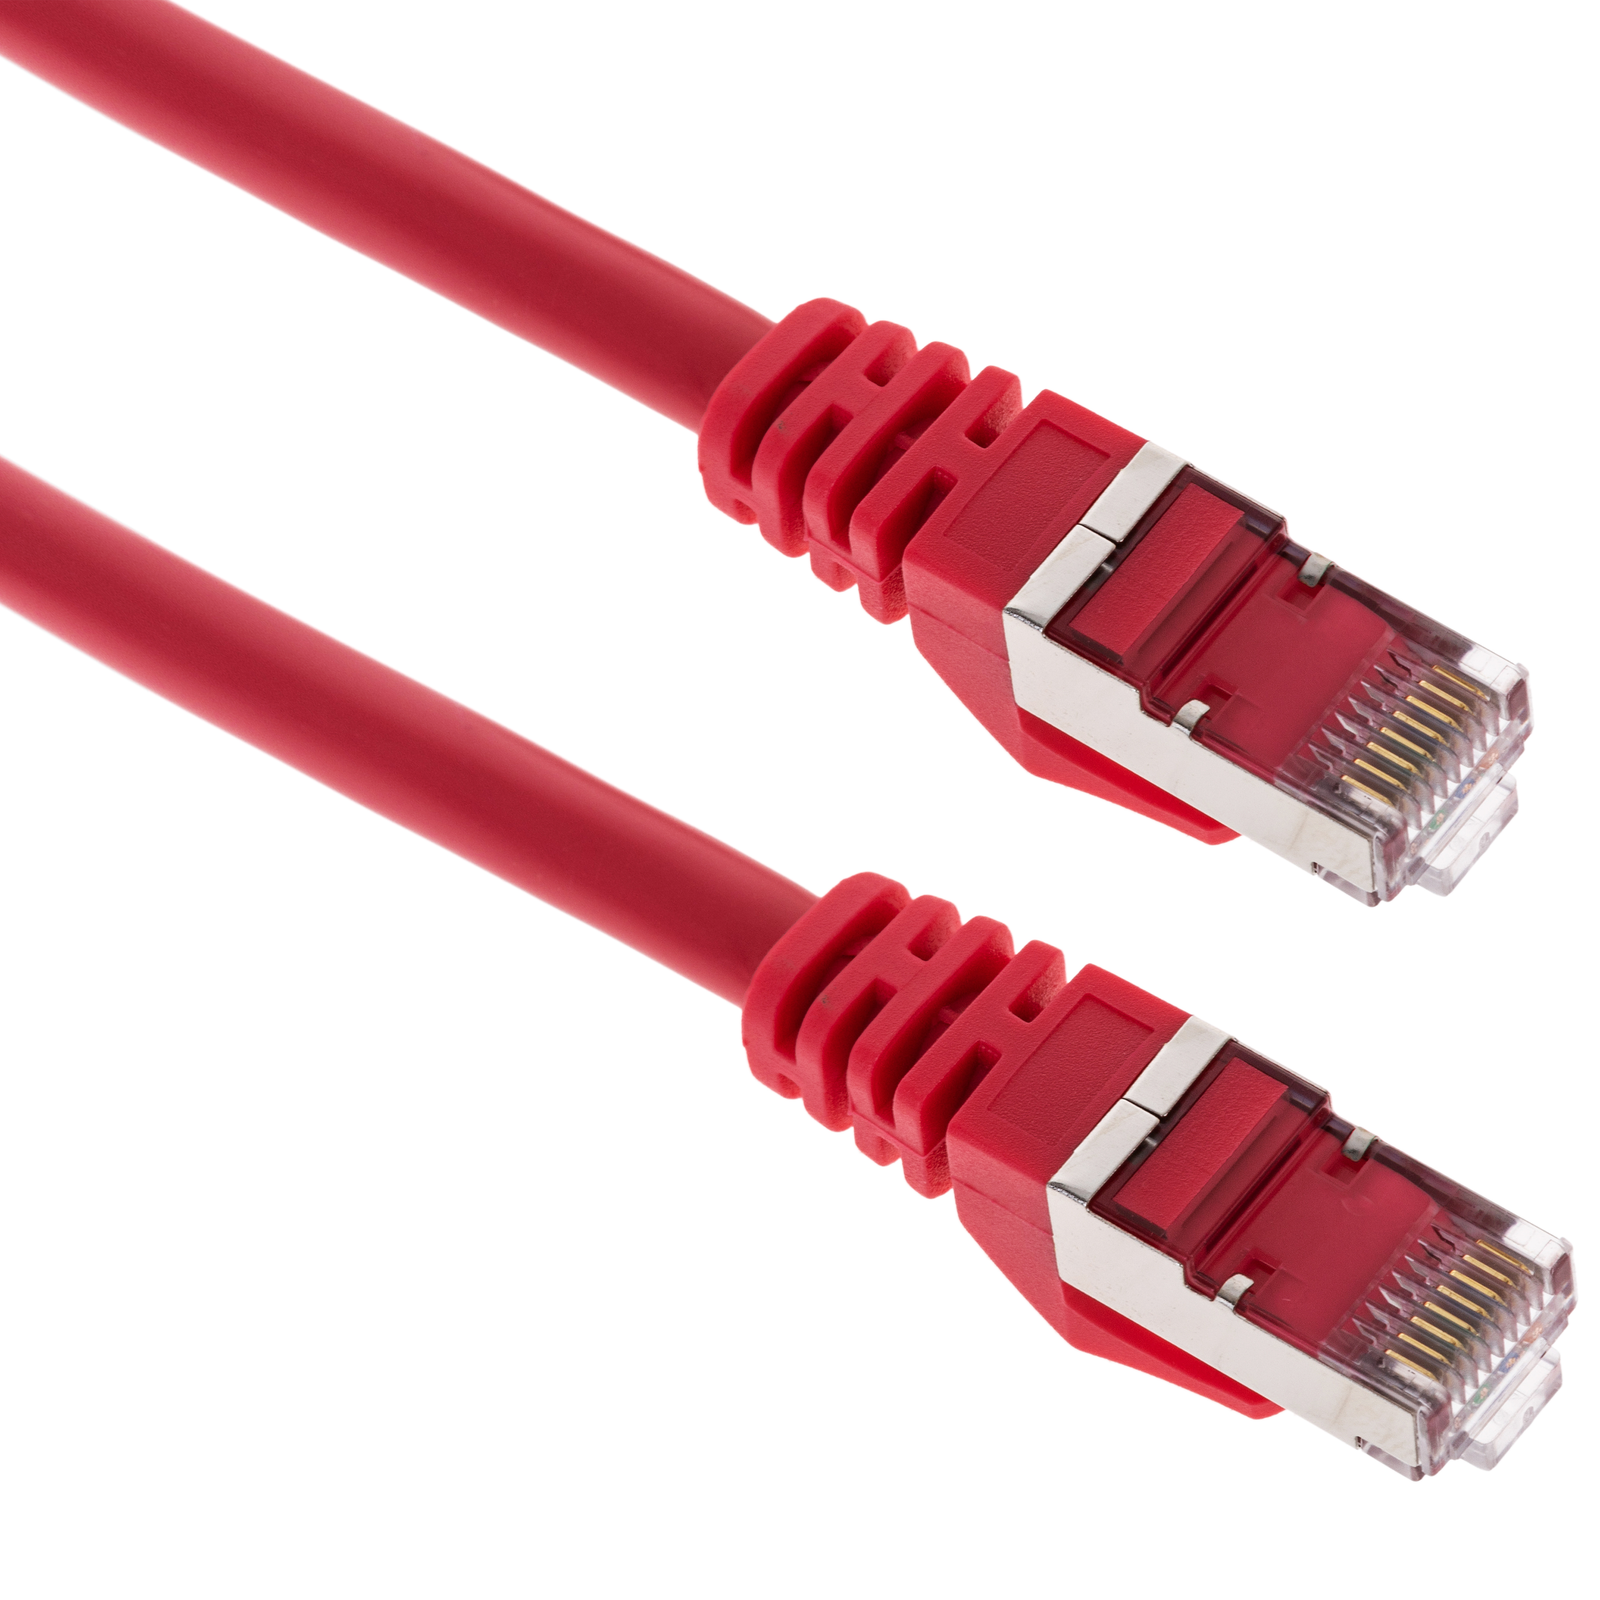 Ethernet network cable LAN FTP RJ45  red 3m - Cablematic